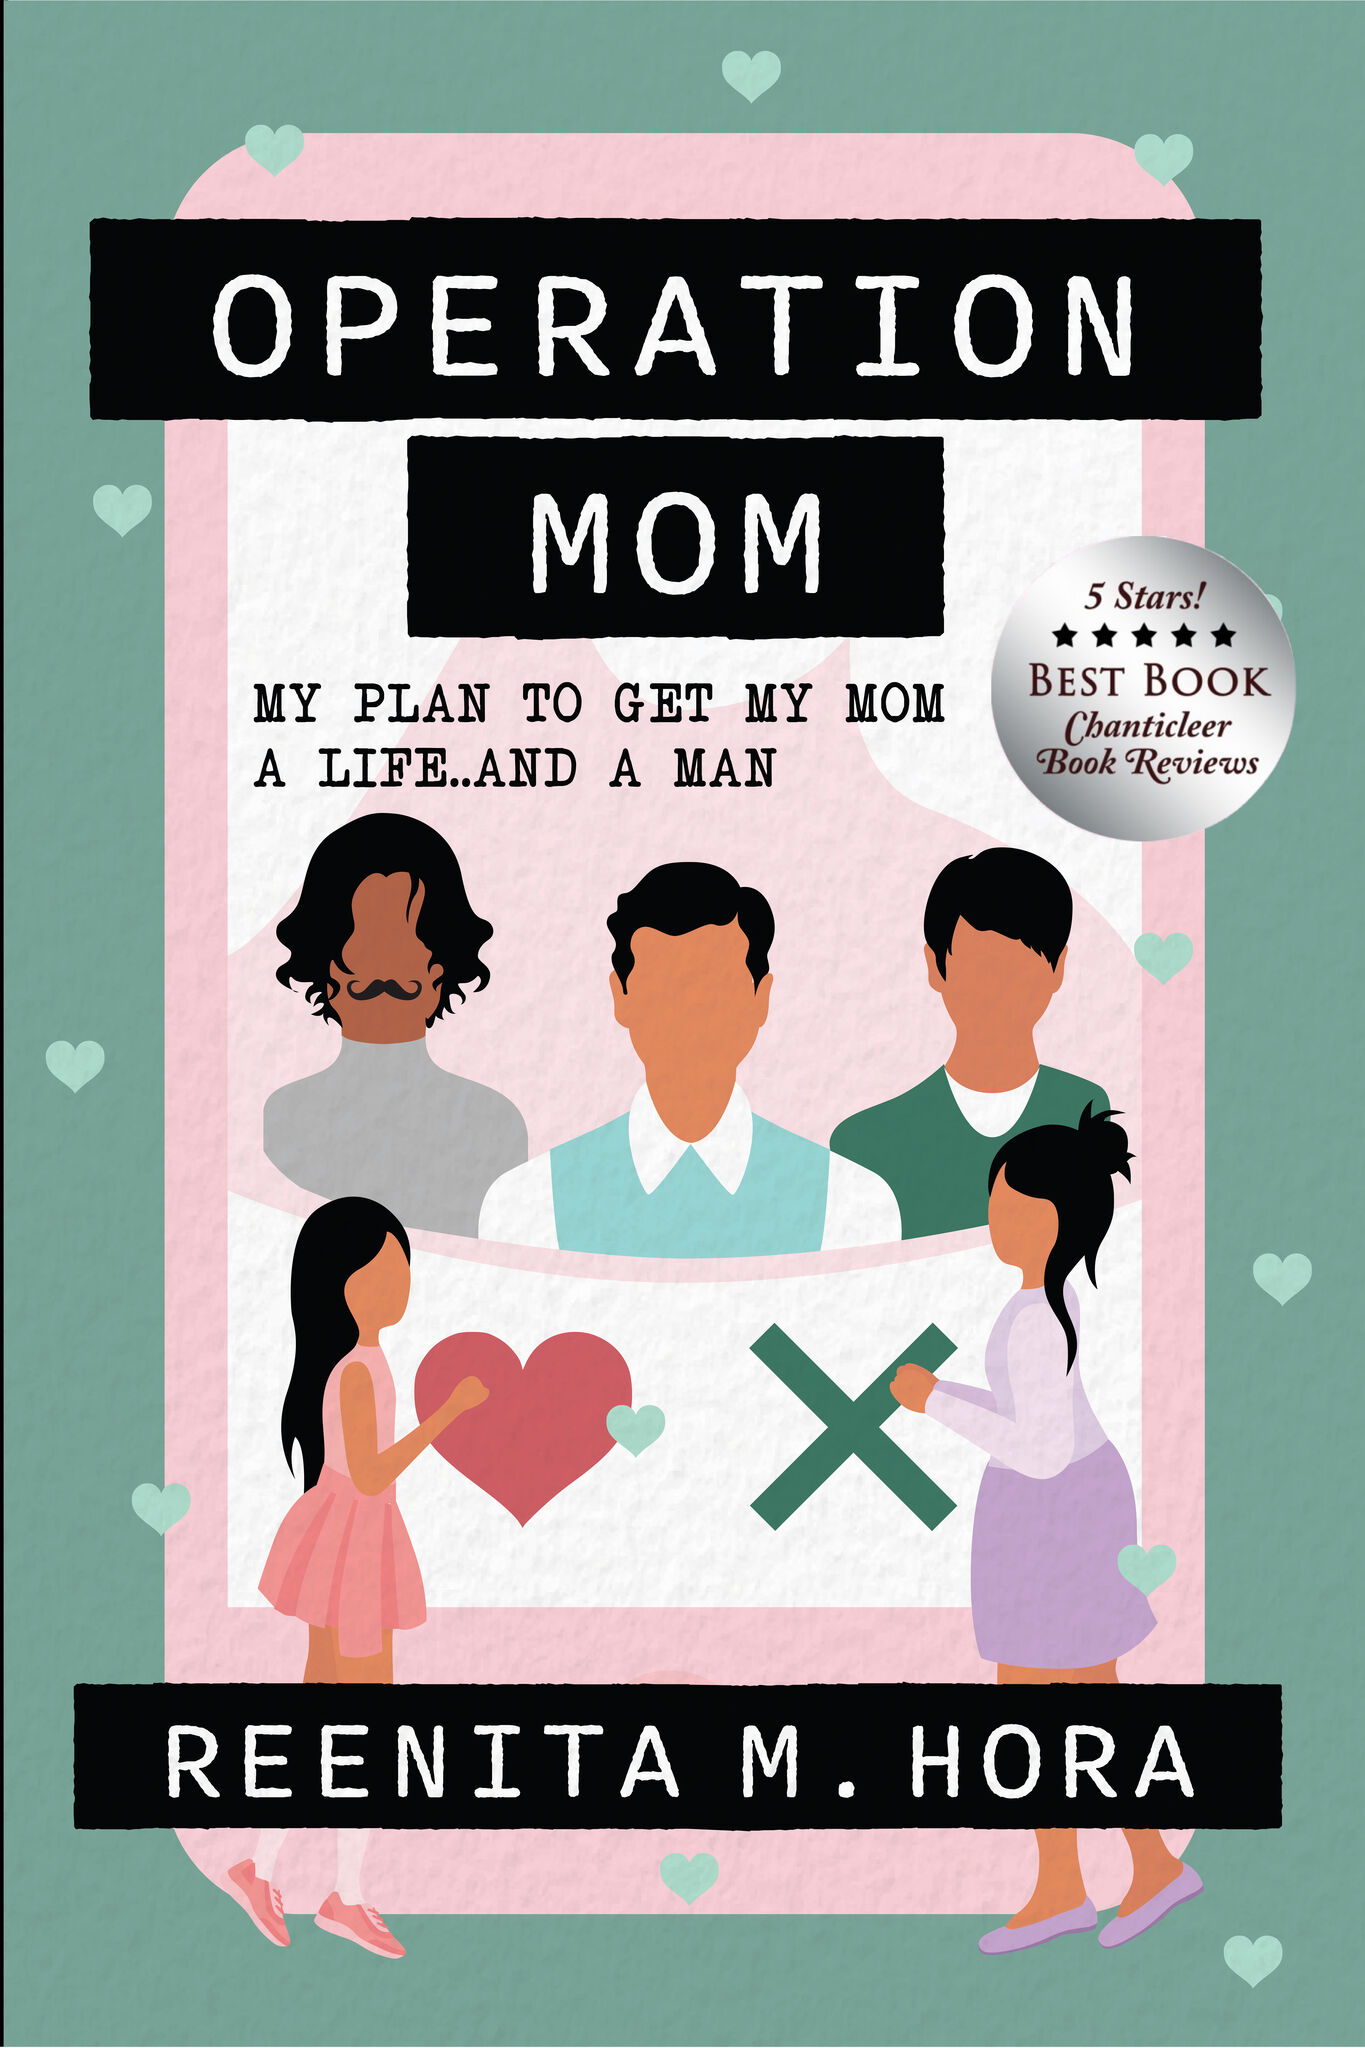 OPERATION MOM - HOW I GOT MY MOTHER A LIFE AND A MAN